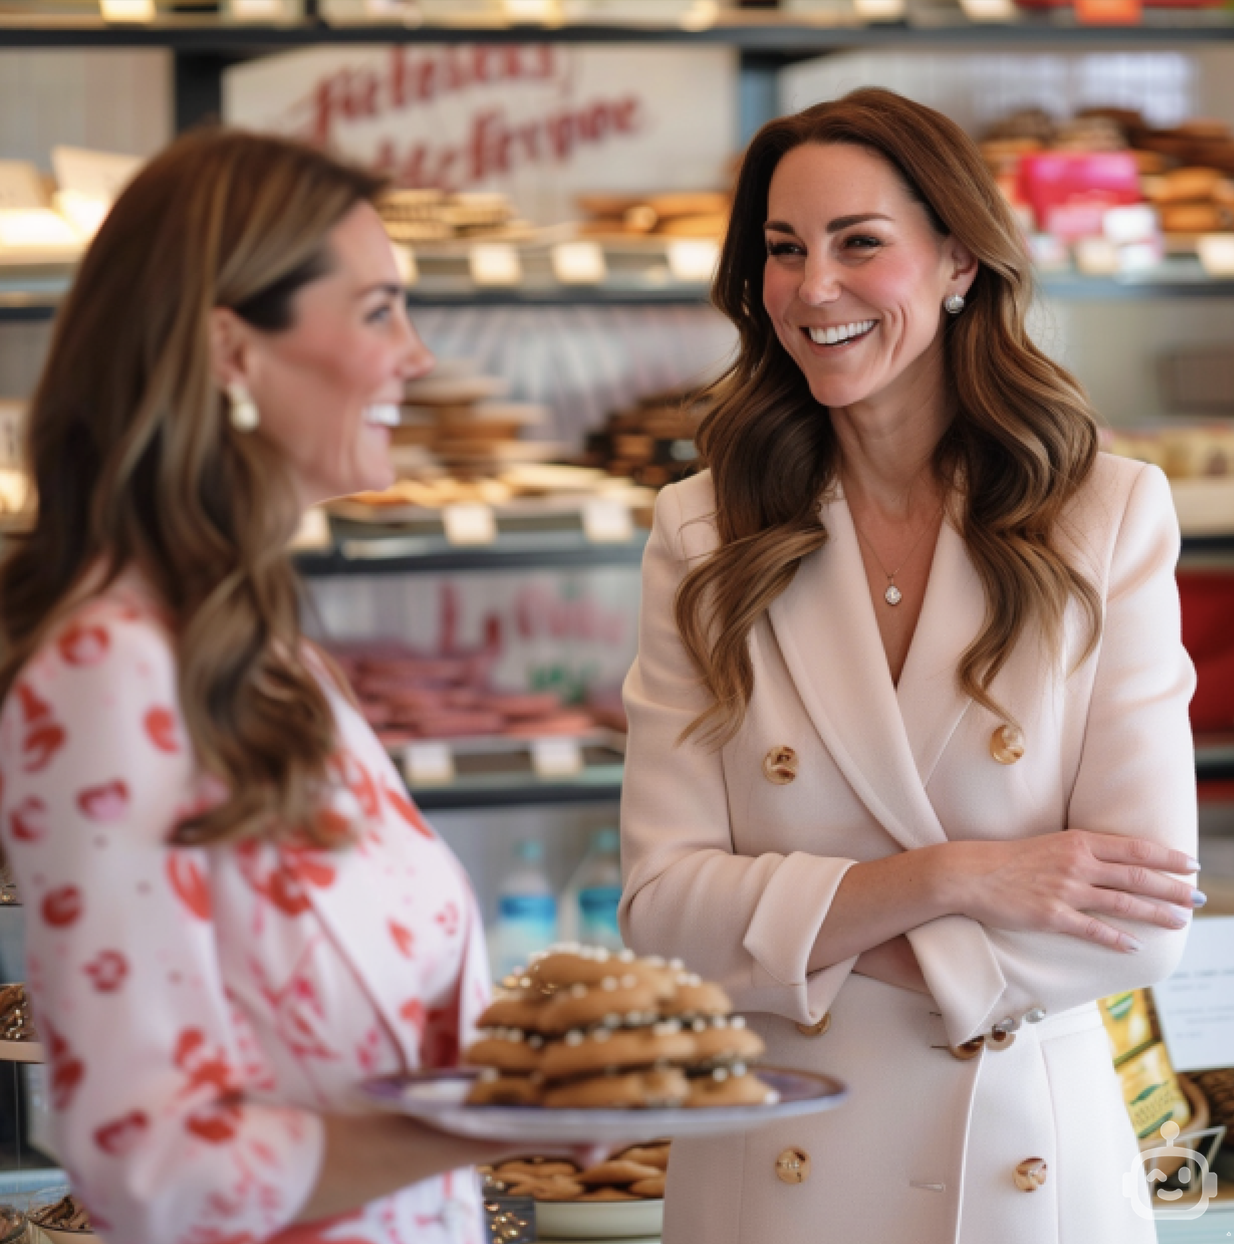 Two women smiling, one holding a plate of cookies, both wearing elegant dresses, in a bakery setting